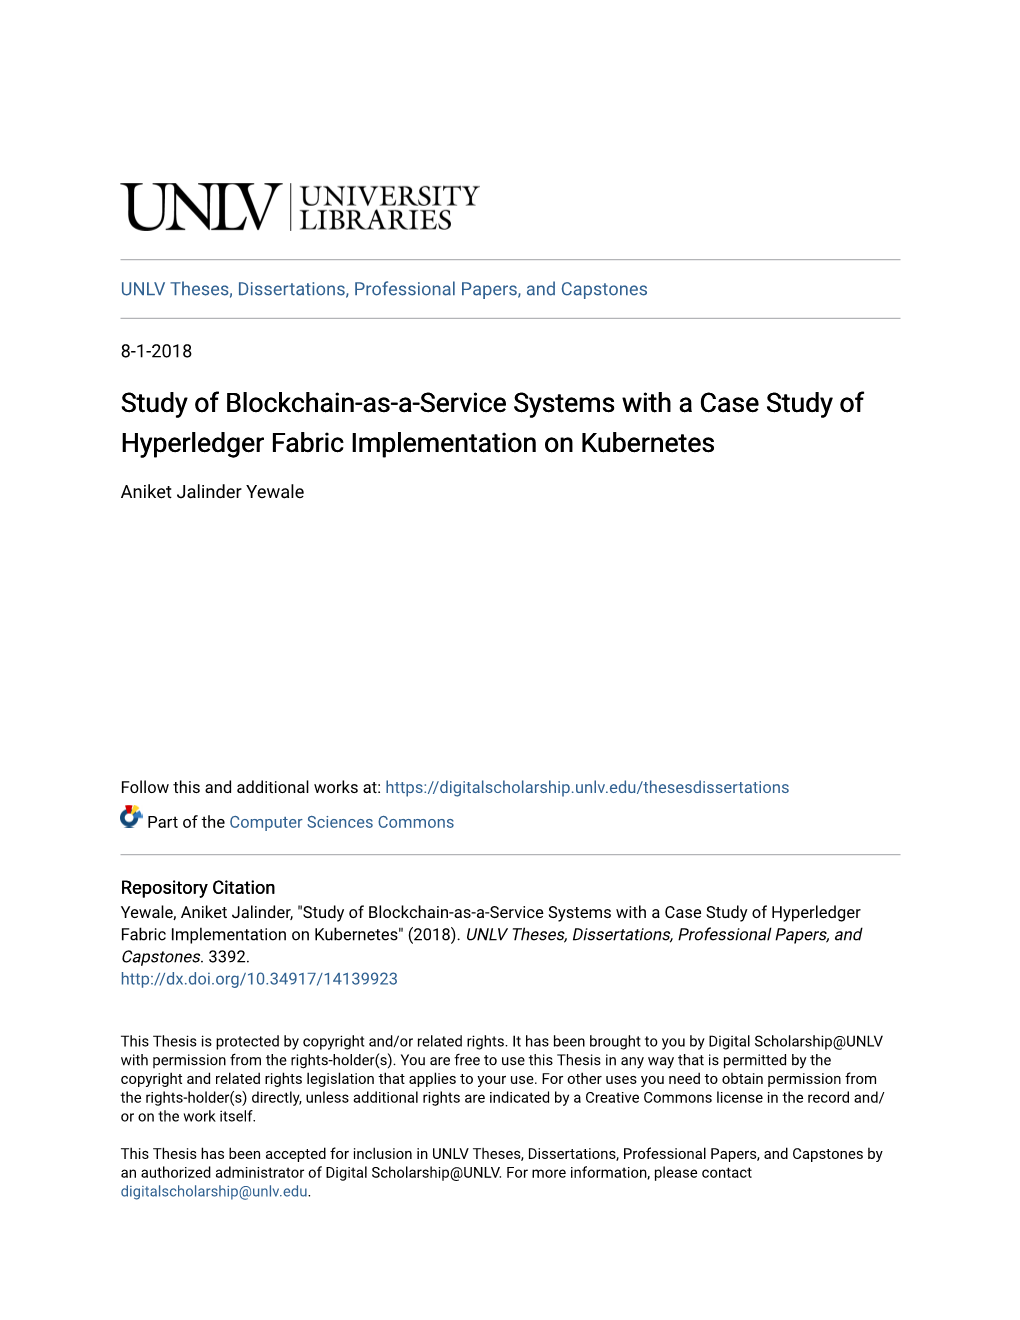 Study of Blockchain-As-A-Service Systems with a Case Study of Hyperledger Fabric Implementation on Kubernetes